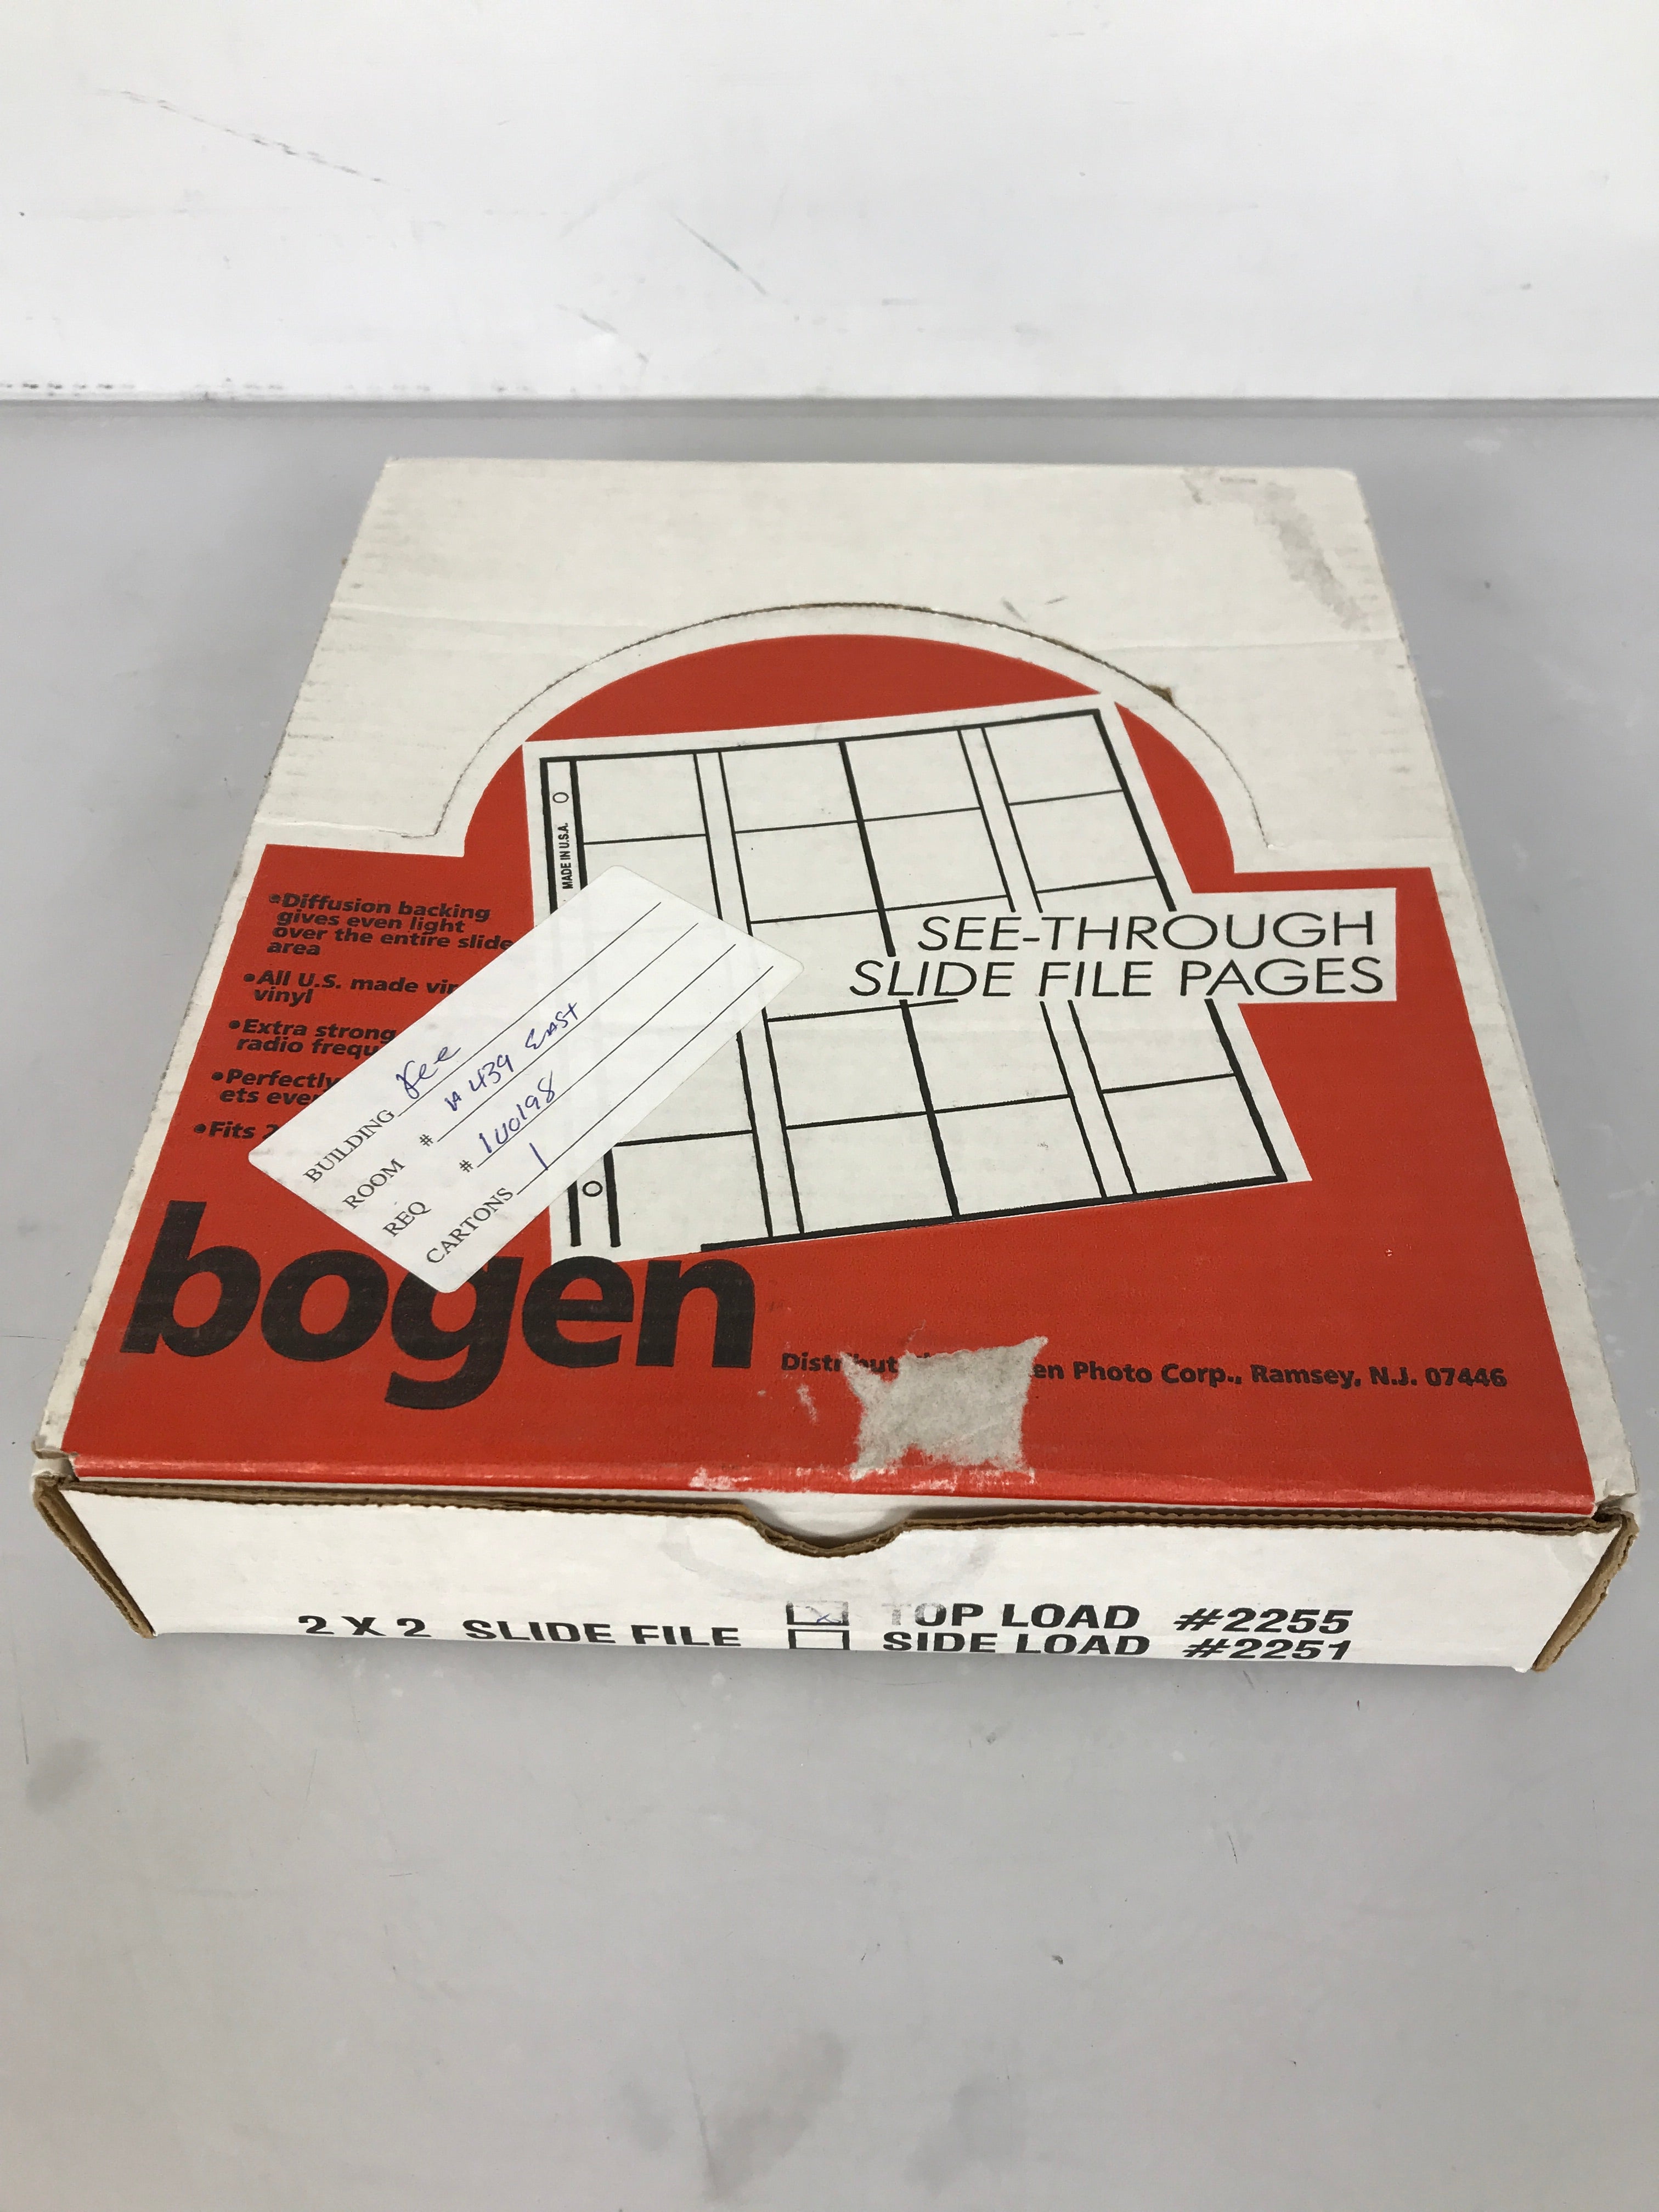 Box of 100 Bogen 2x2 See-Through Top Load Slide File Pages #2255